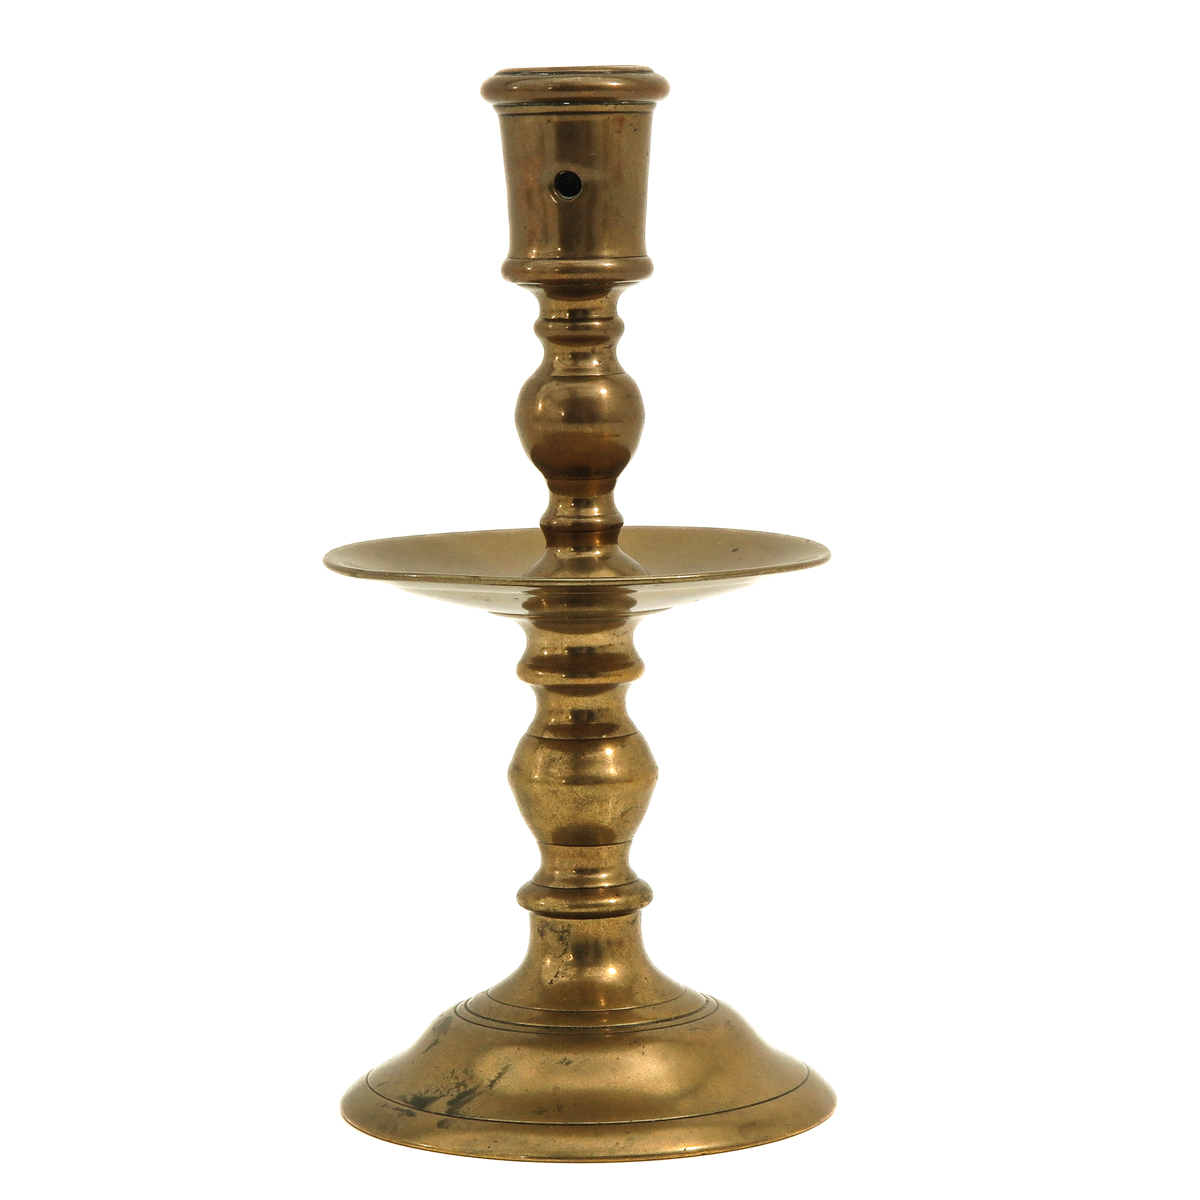 A 17th Century Dutch Candlestick - Image 3 of 8